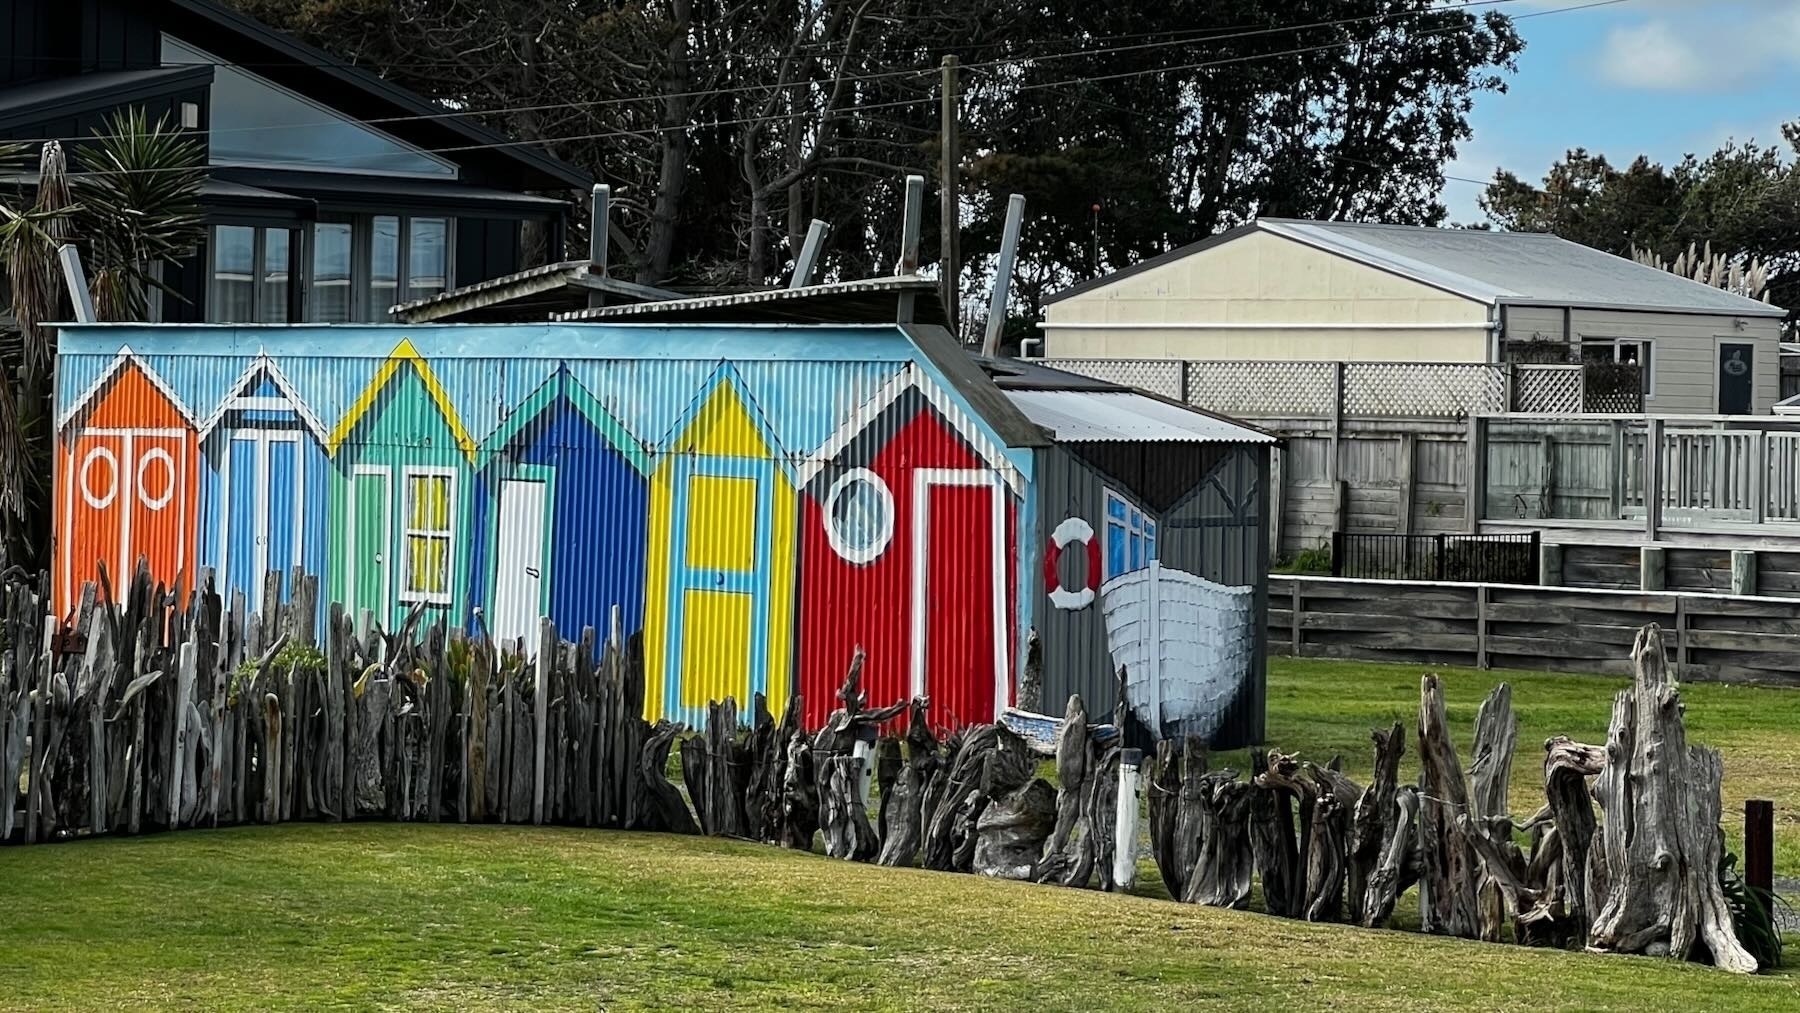 Shed painted to resemble a row of beach-side doorways, with boat. 